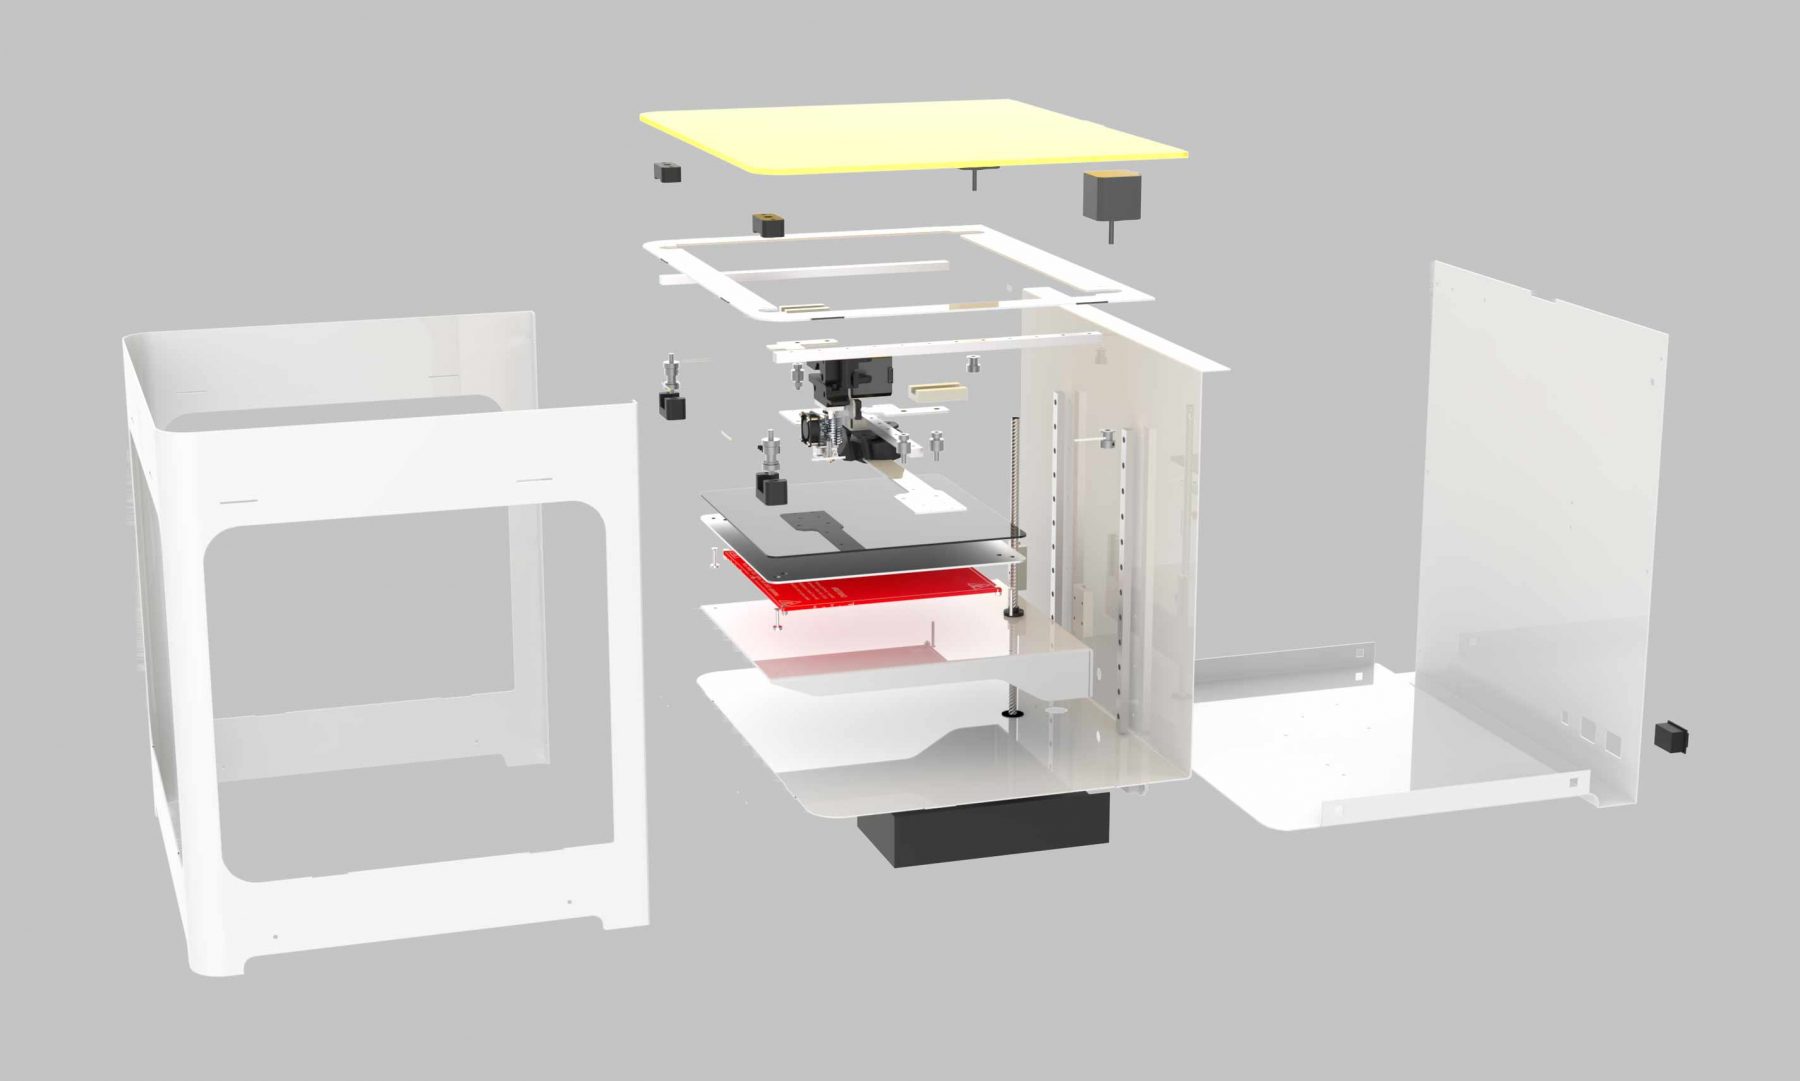 Exploded view of "Dood", FDM 3D printer by Dood Studio and bold-design - www.bold-design.fr